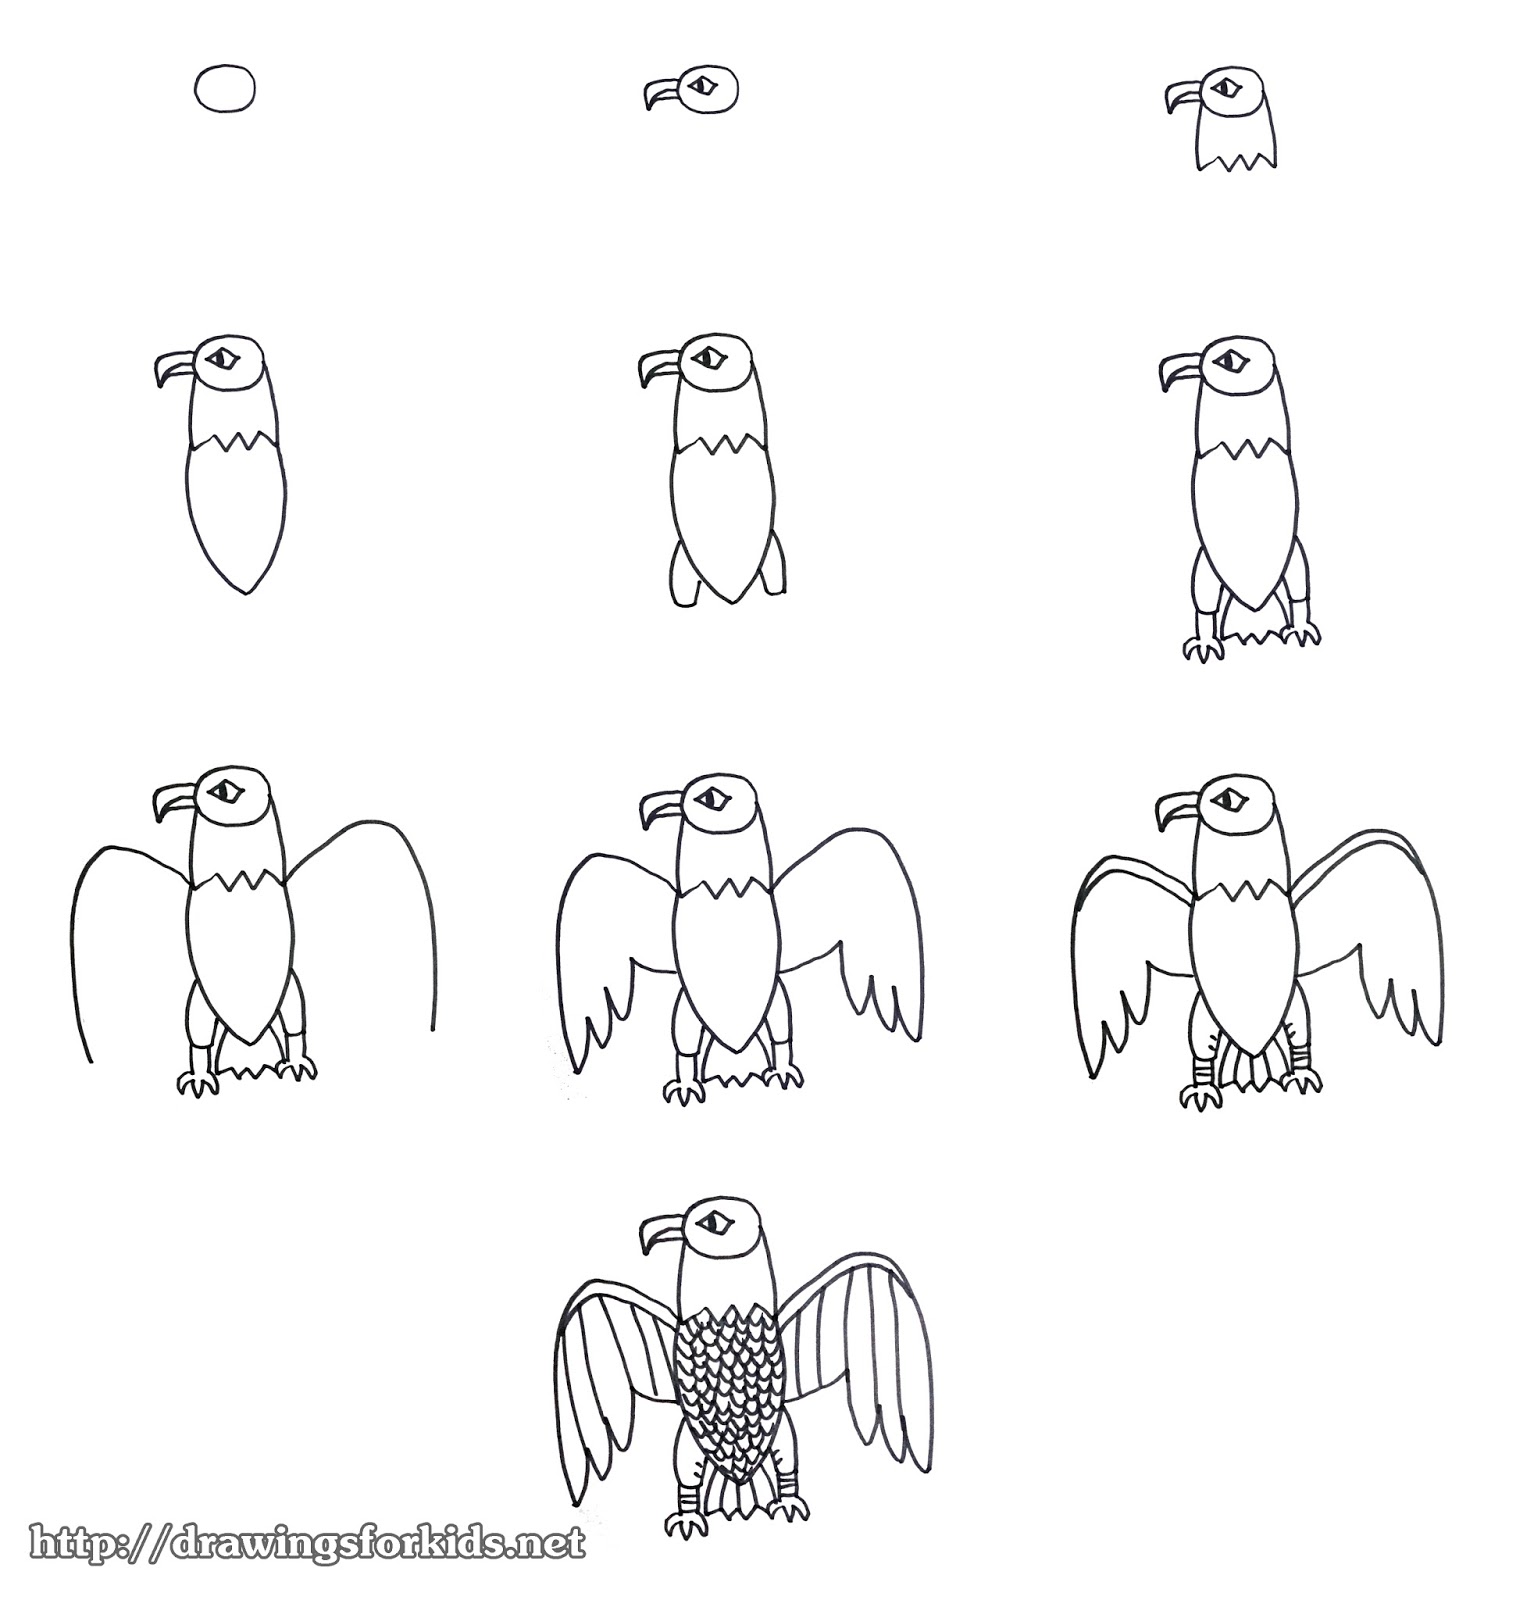 How to draw a Eagle for kids - drawingsforkids.net